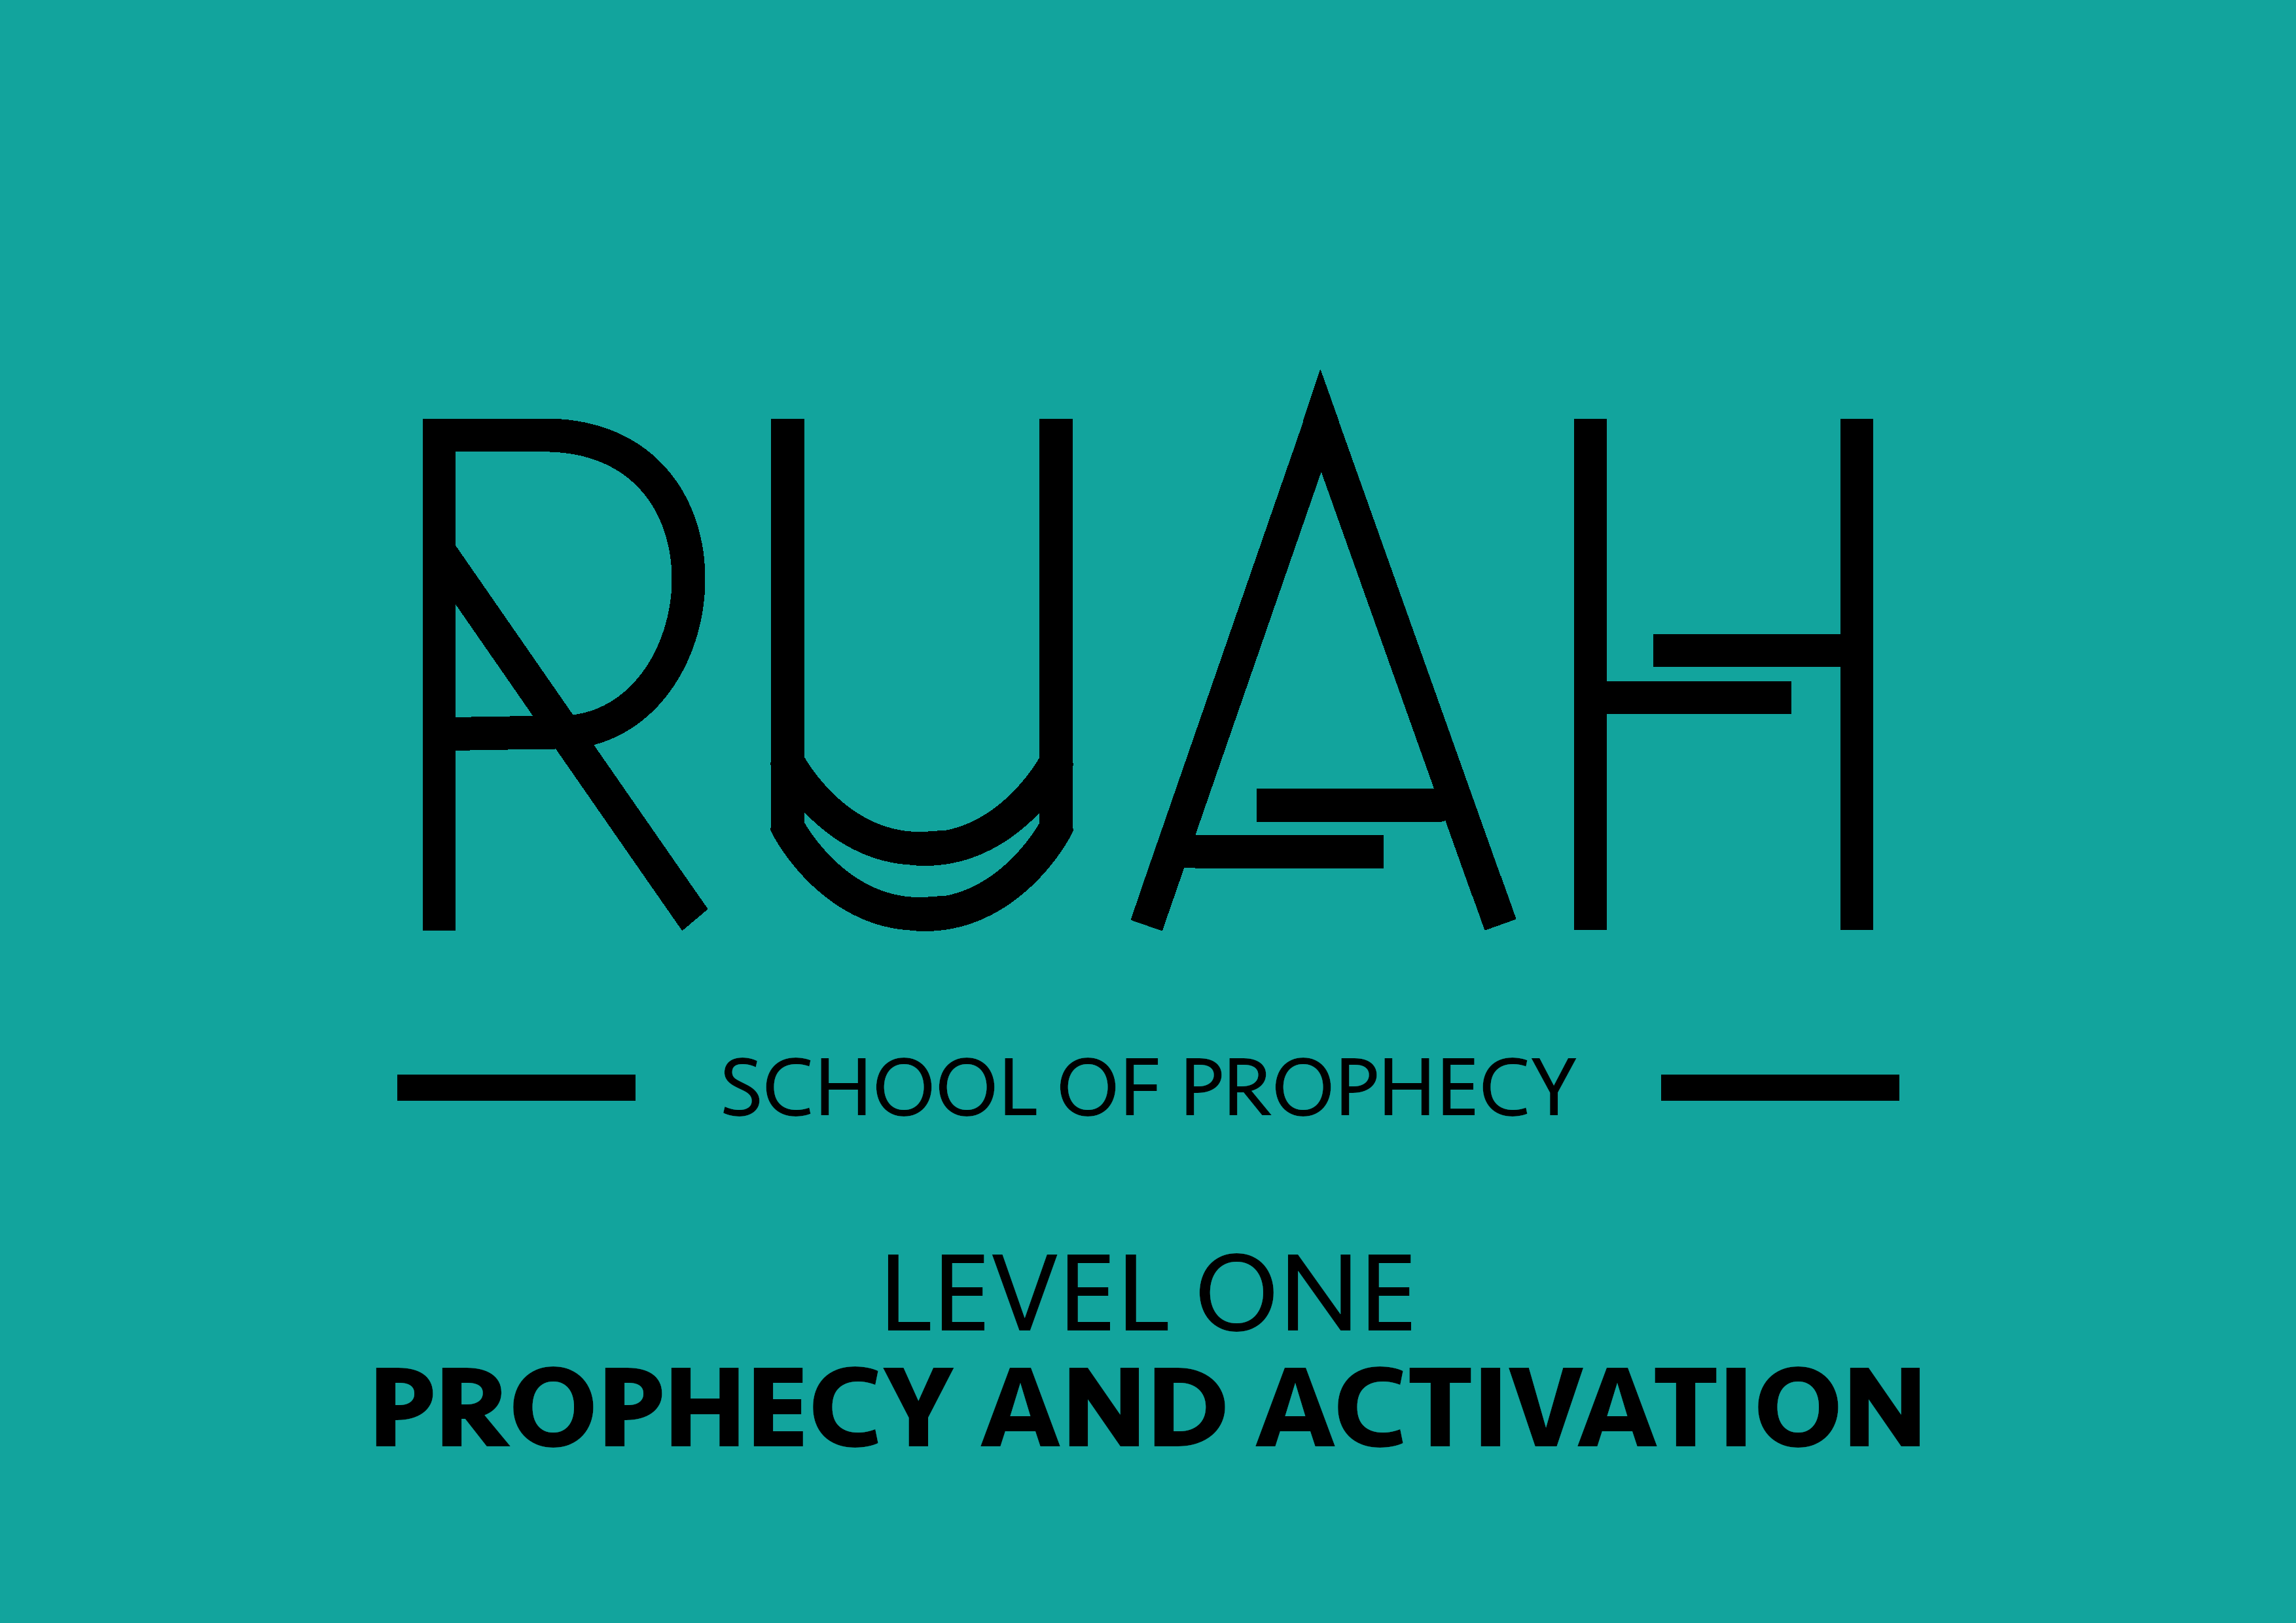 Level 1: Prophecy and Activation